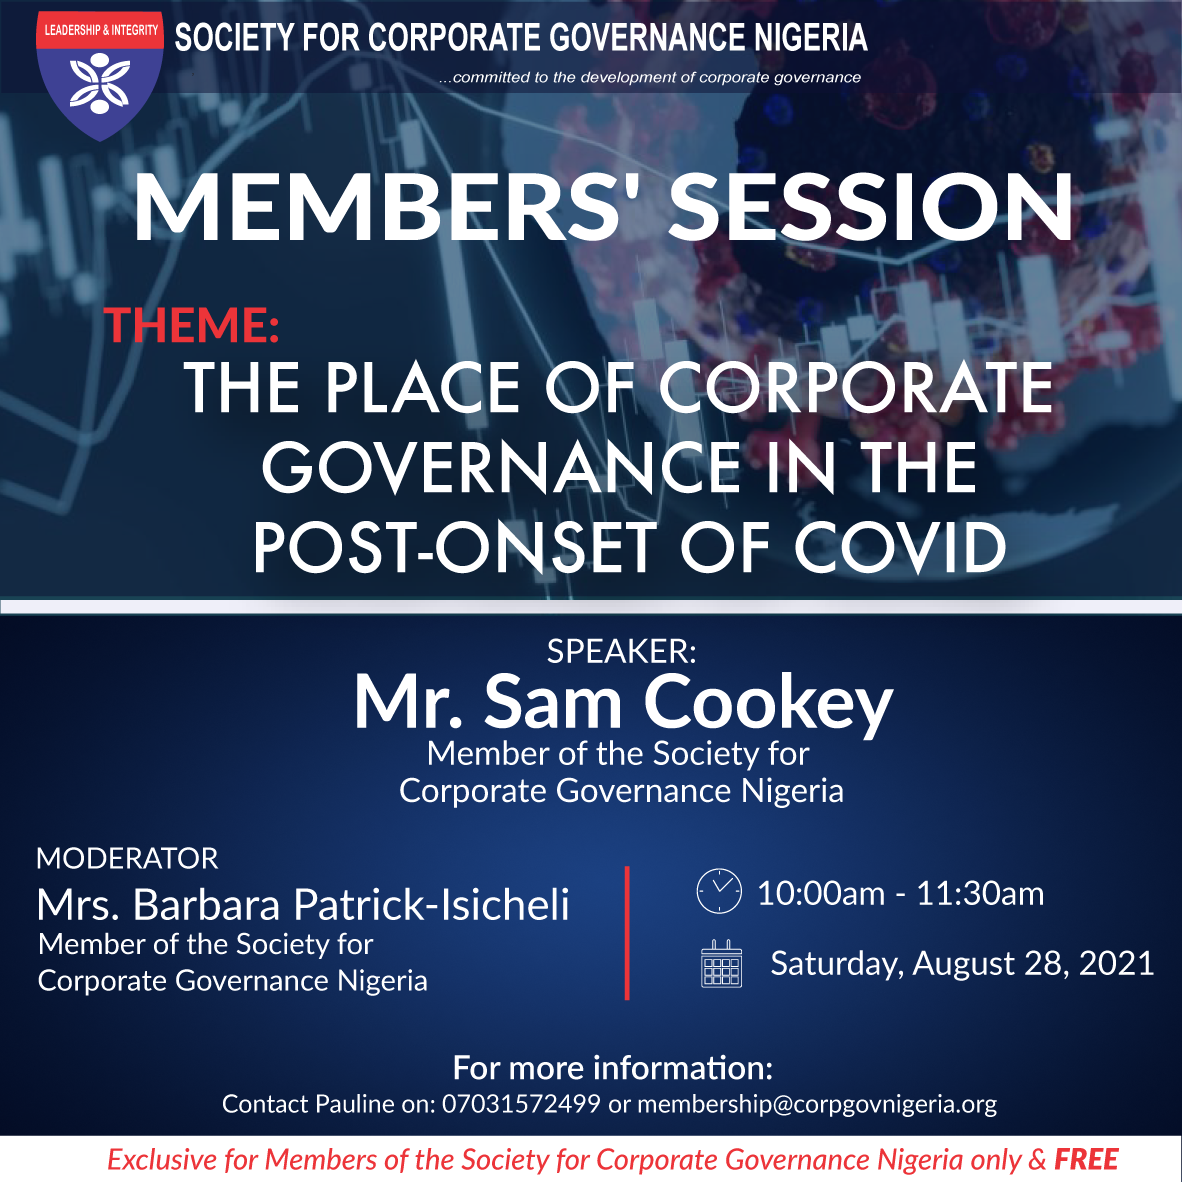 The Place of Corporate Governance in the Post-Onset COVID